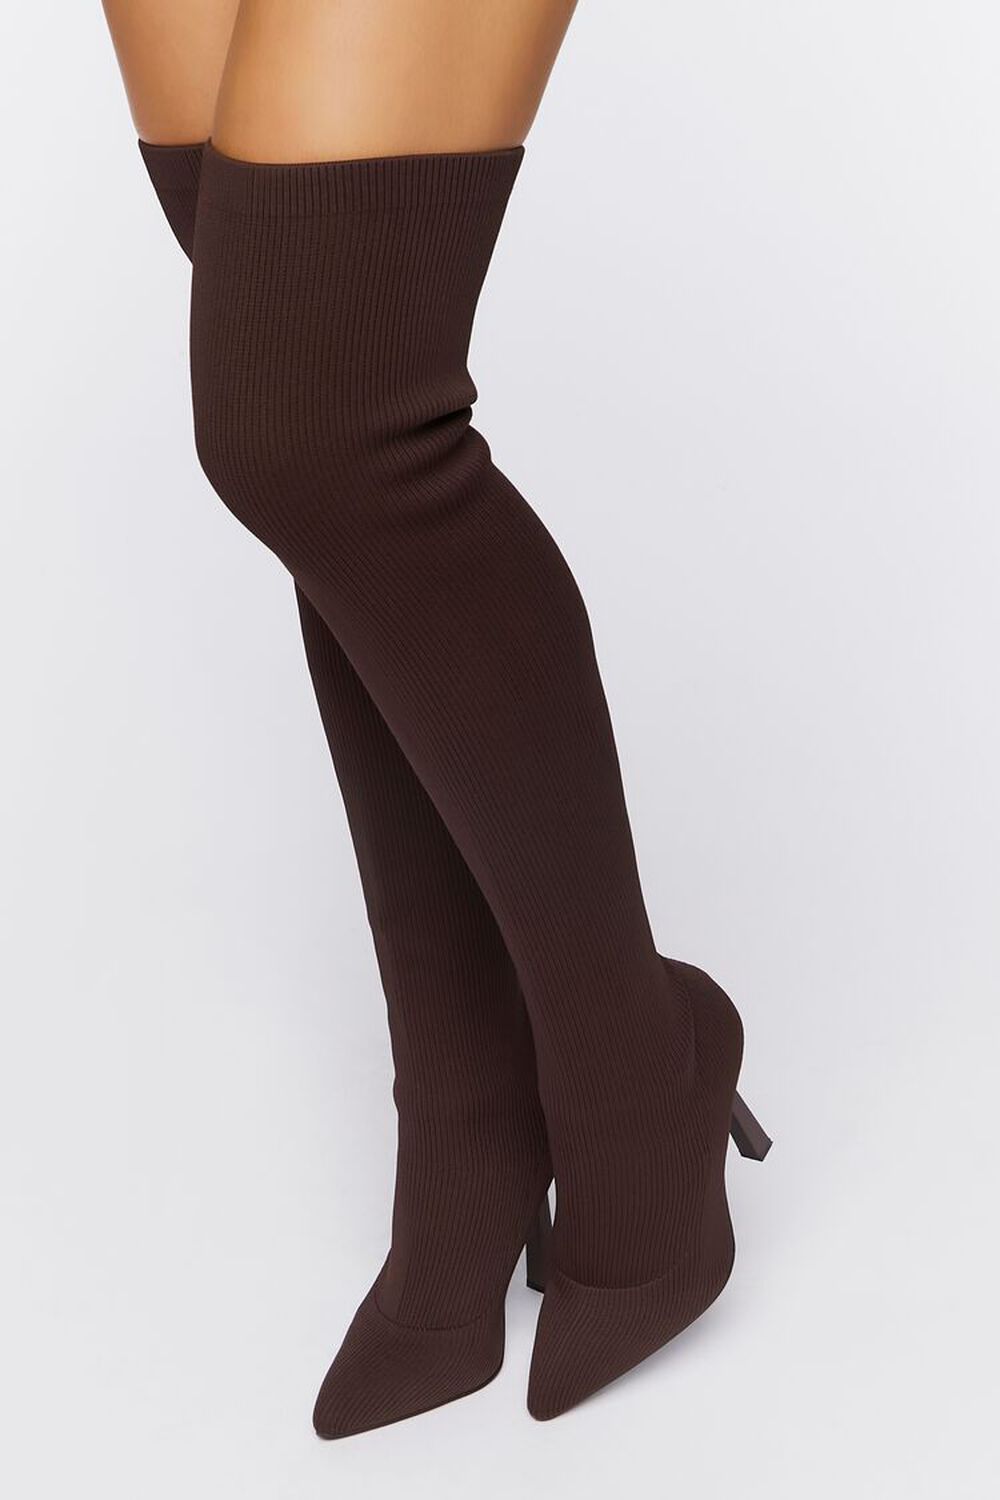 BROWN Over-the-Knee Sock Boots, image 1